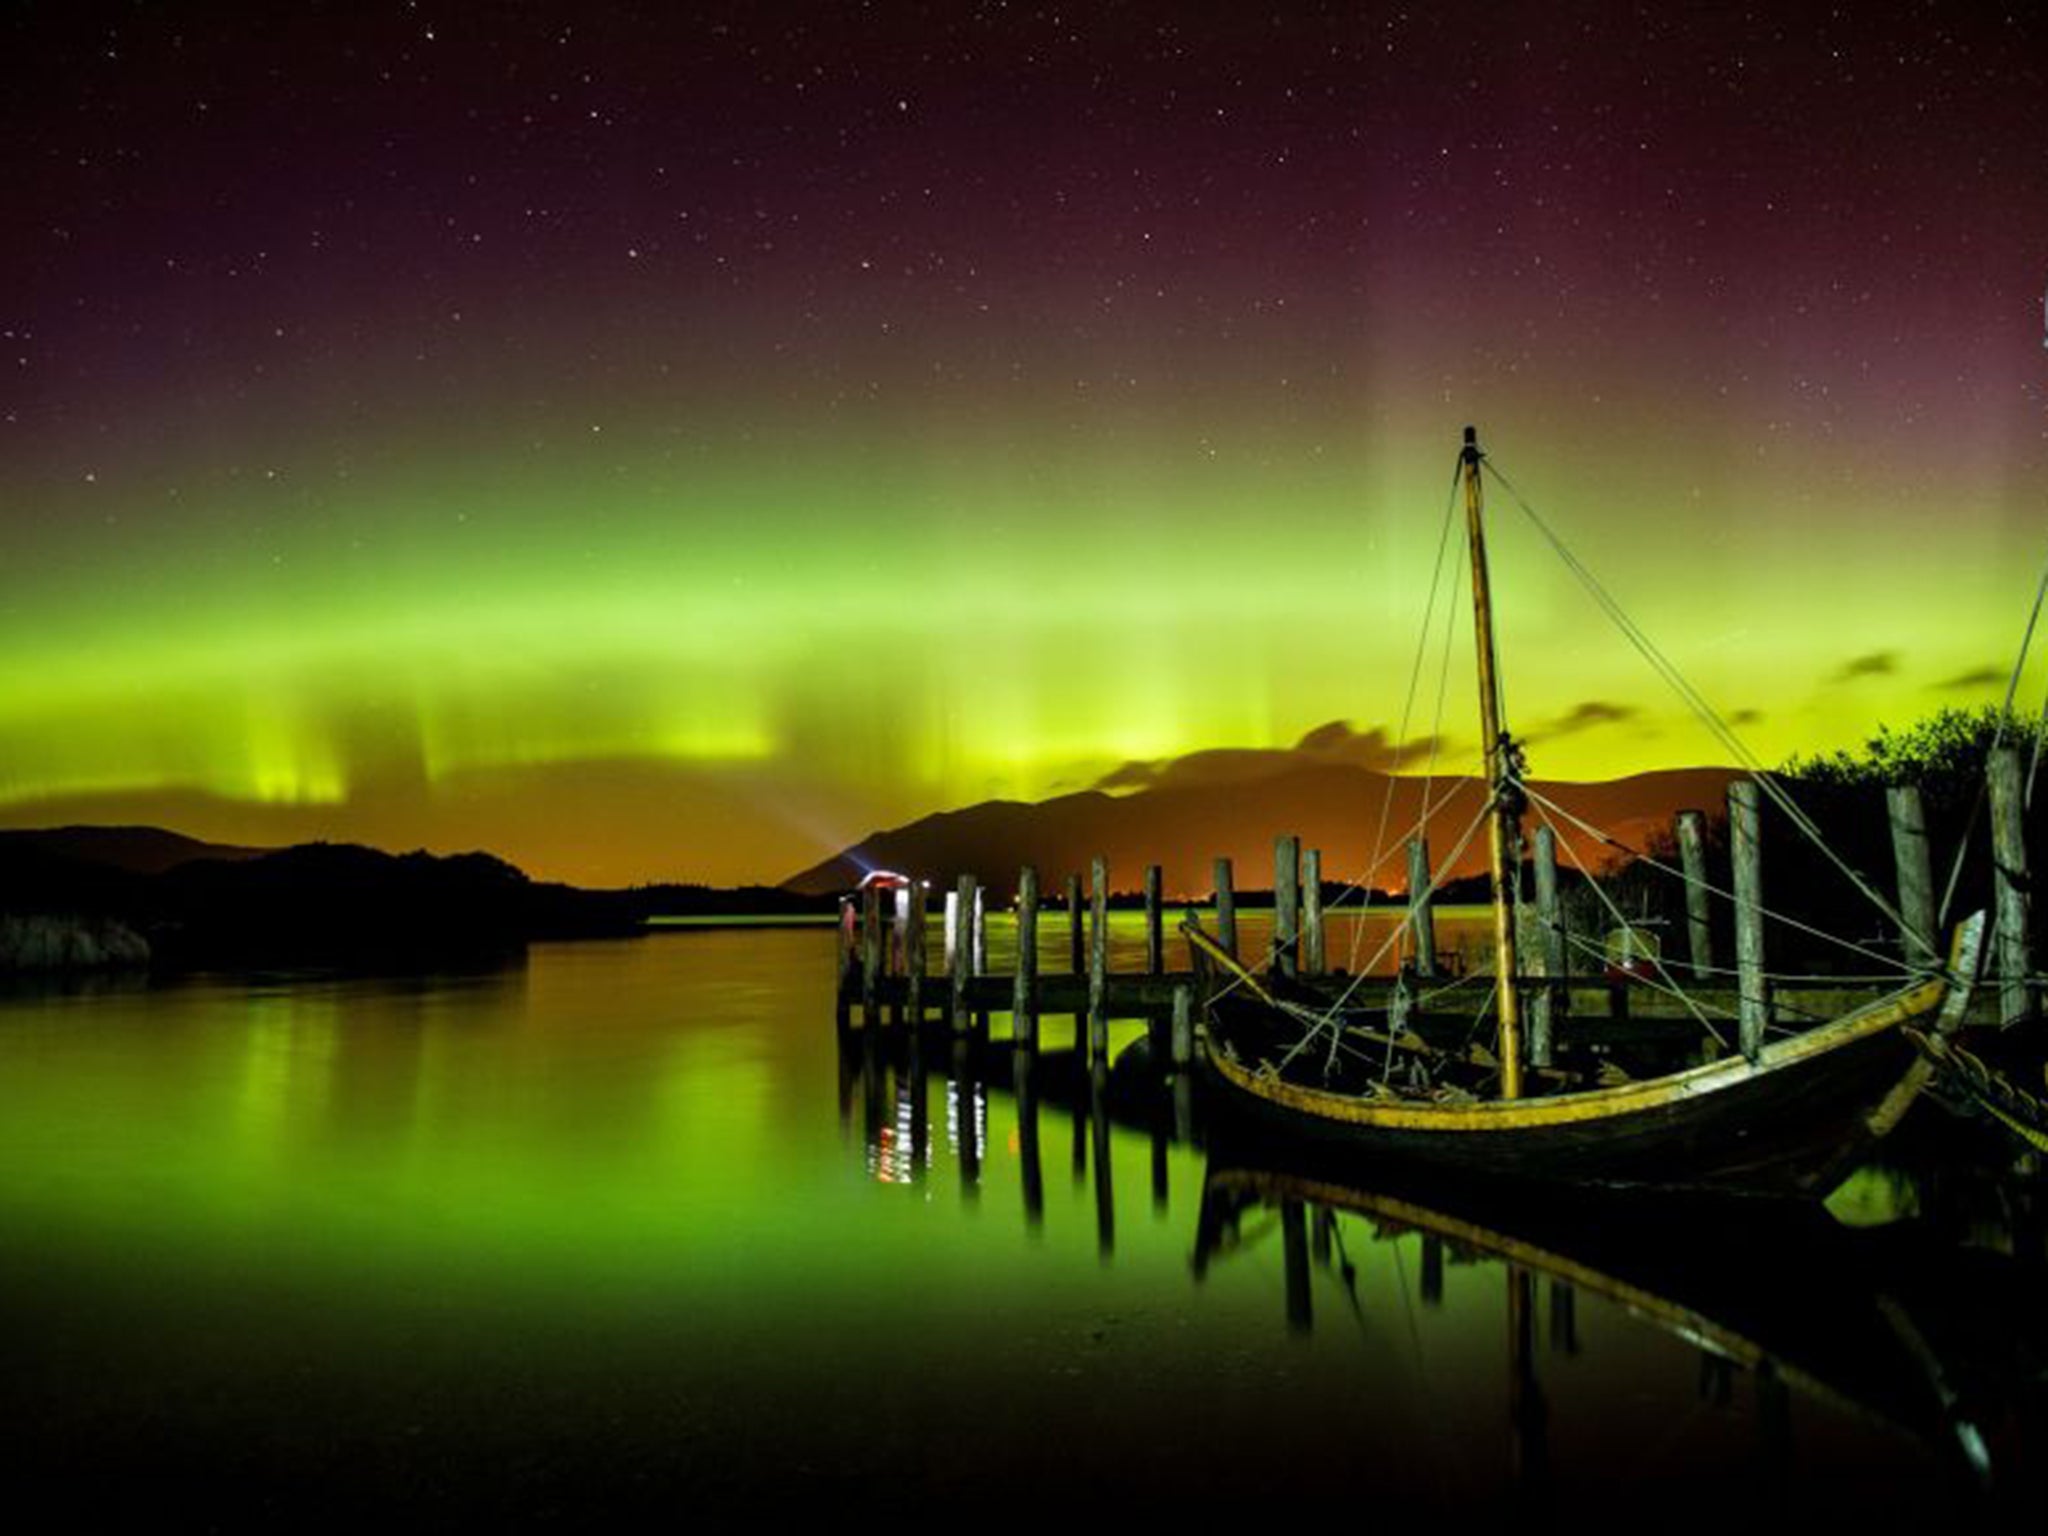 The northern lights, or Aurora Borealis, shine over Derwentwater, near Keswick, in the Lake District